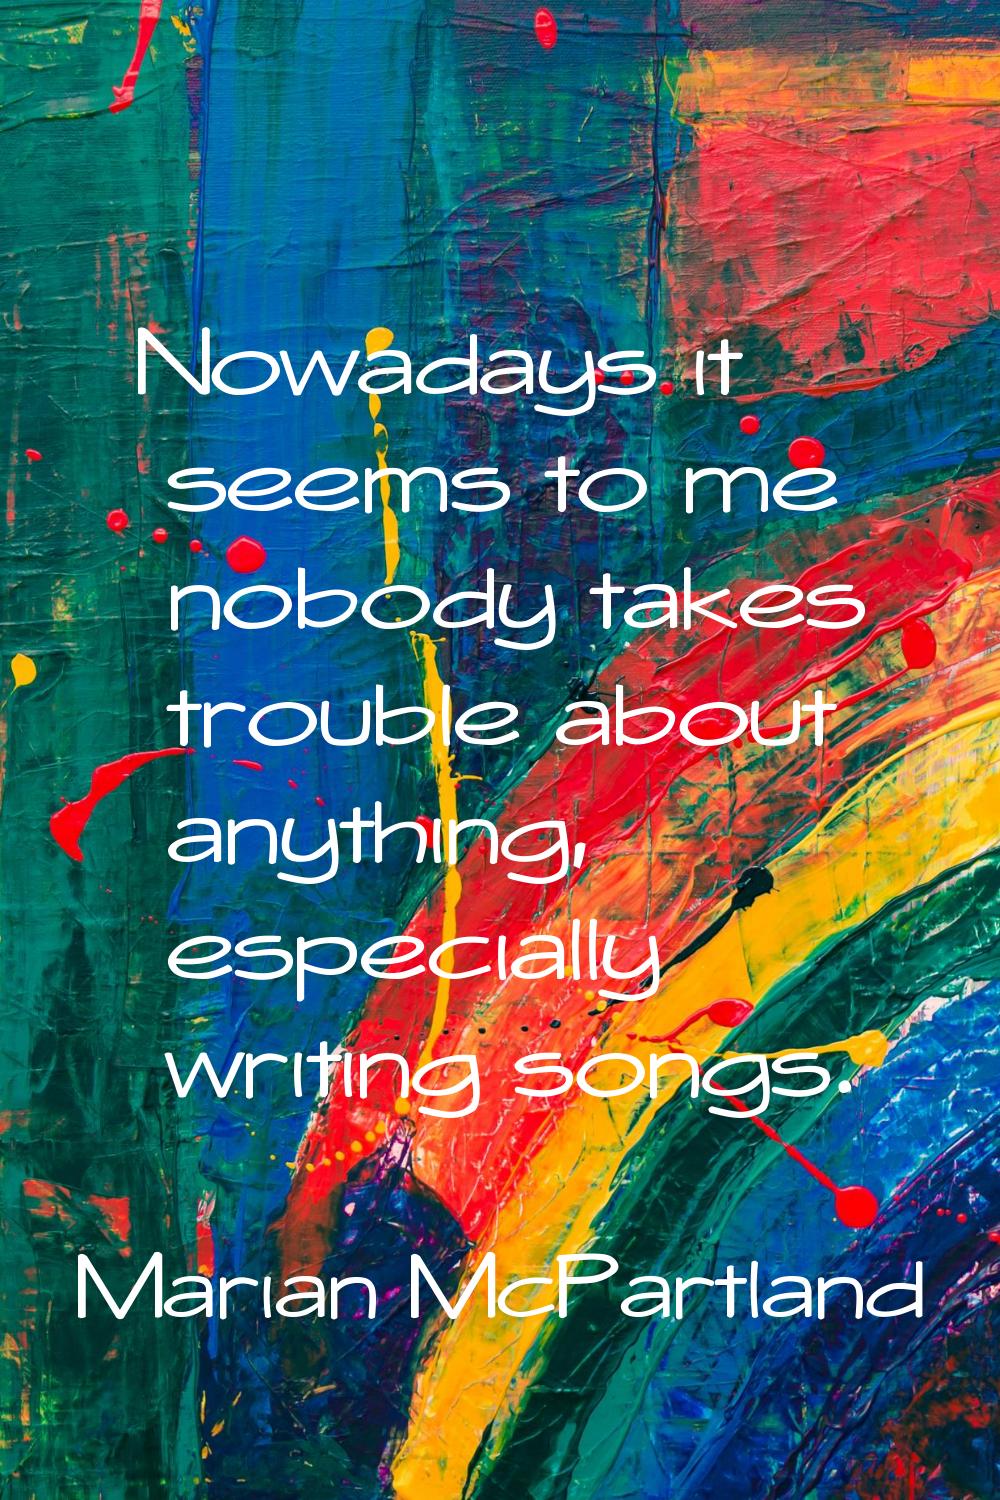 Nowadays it seems to me nobody takes trouble about anything, especially writing songs.